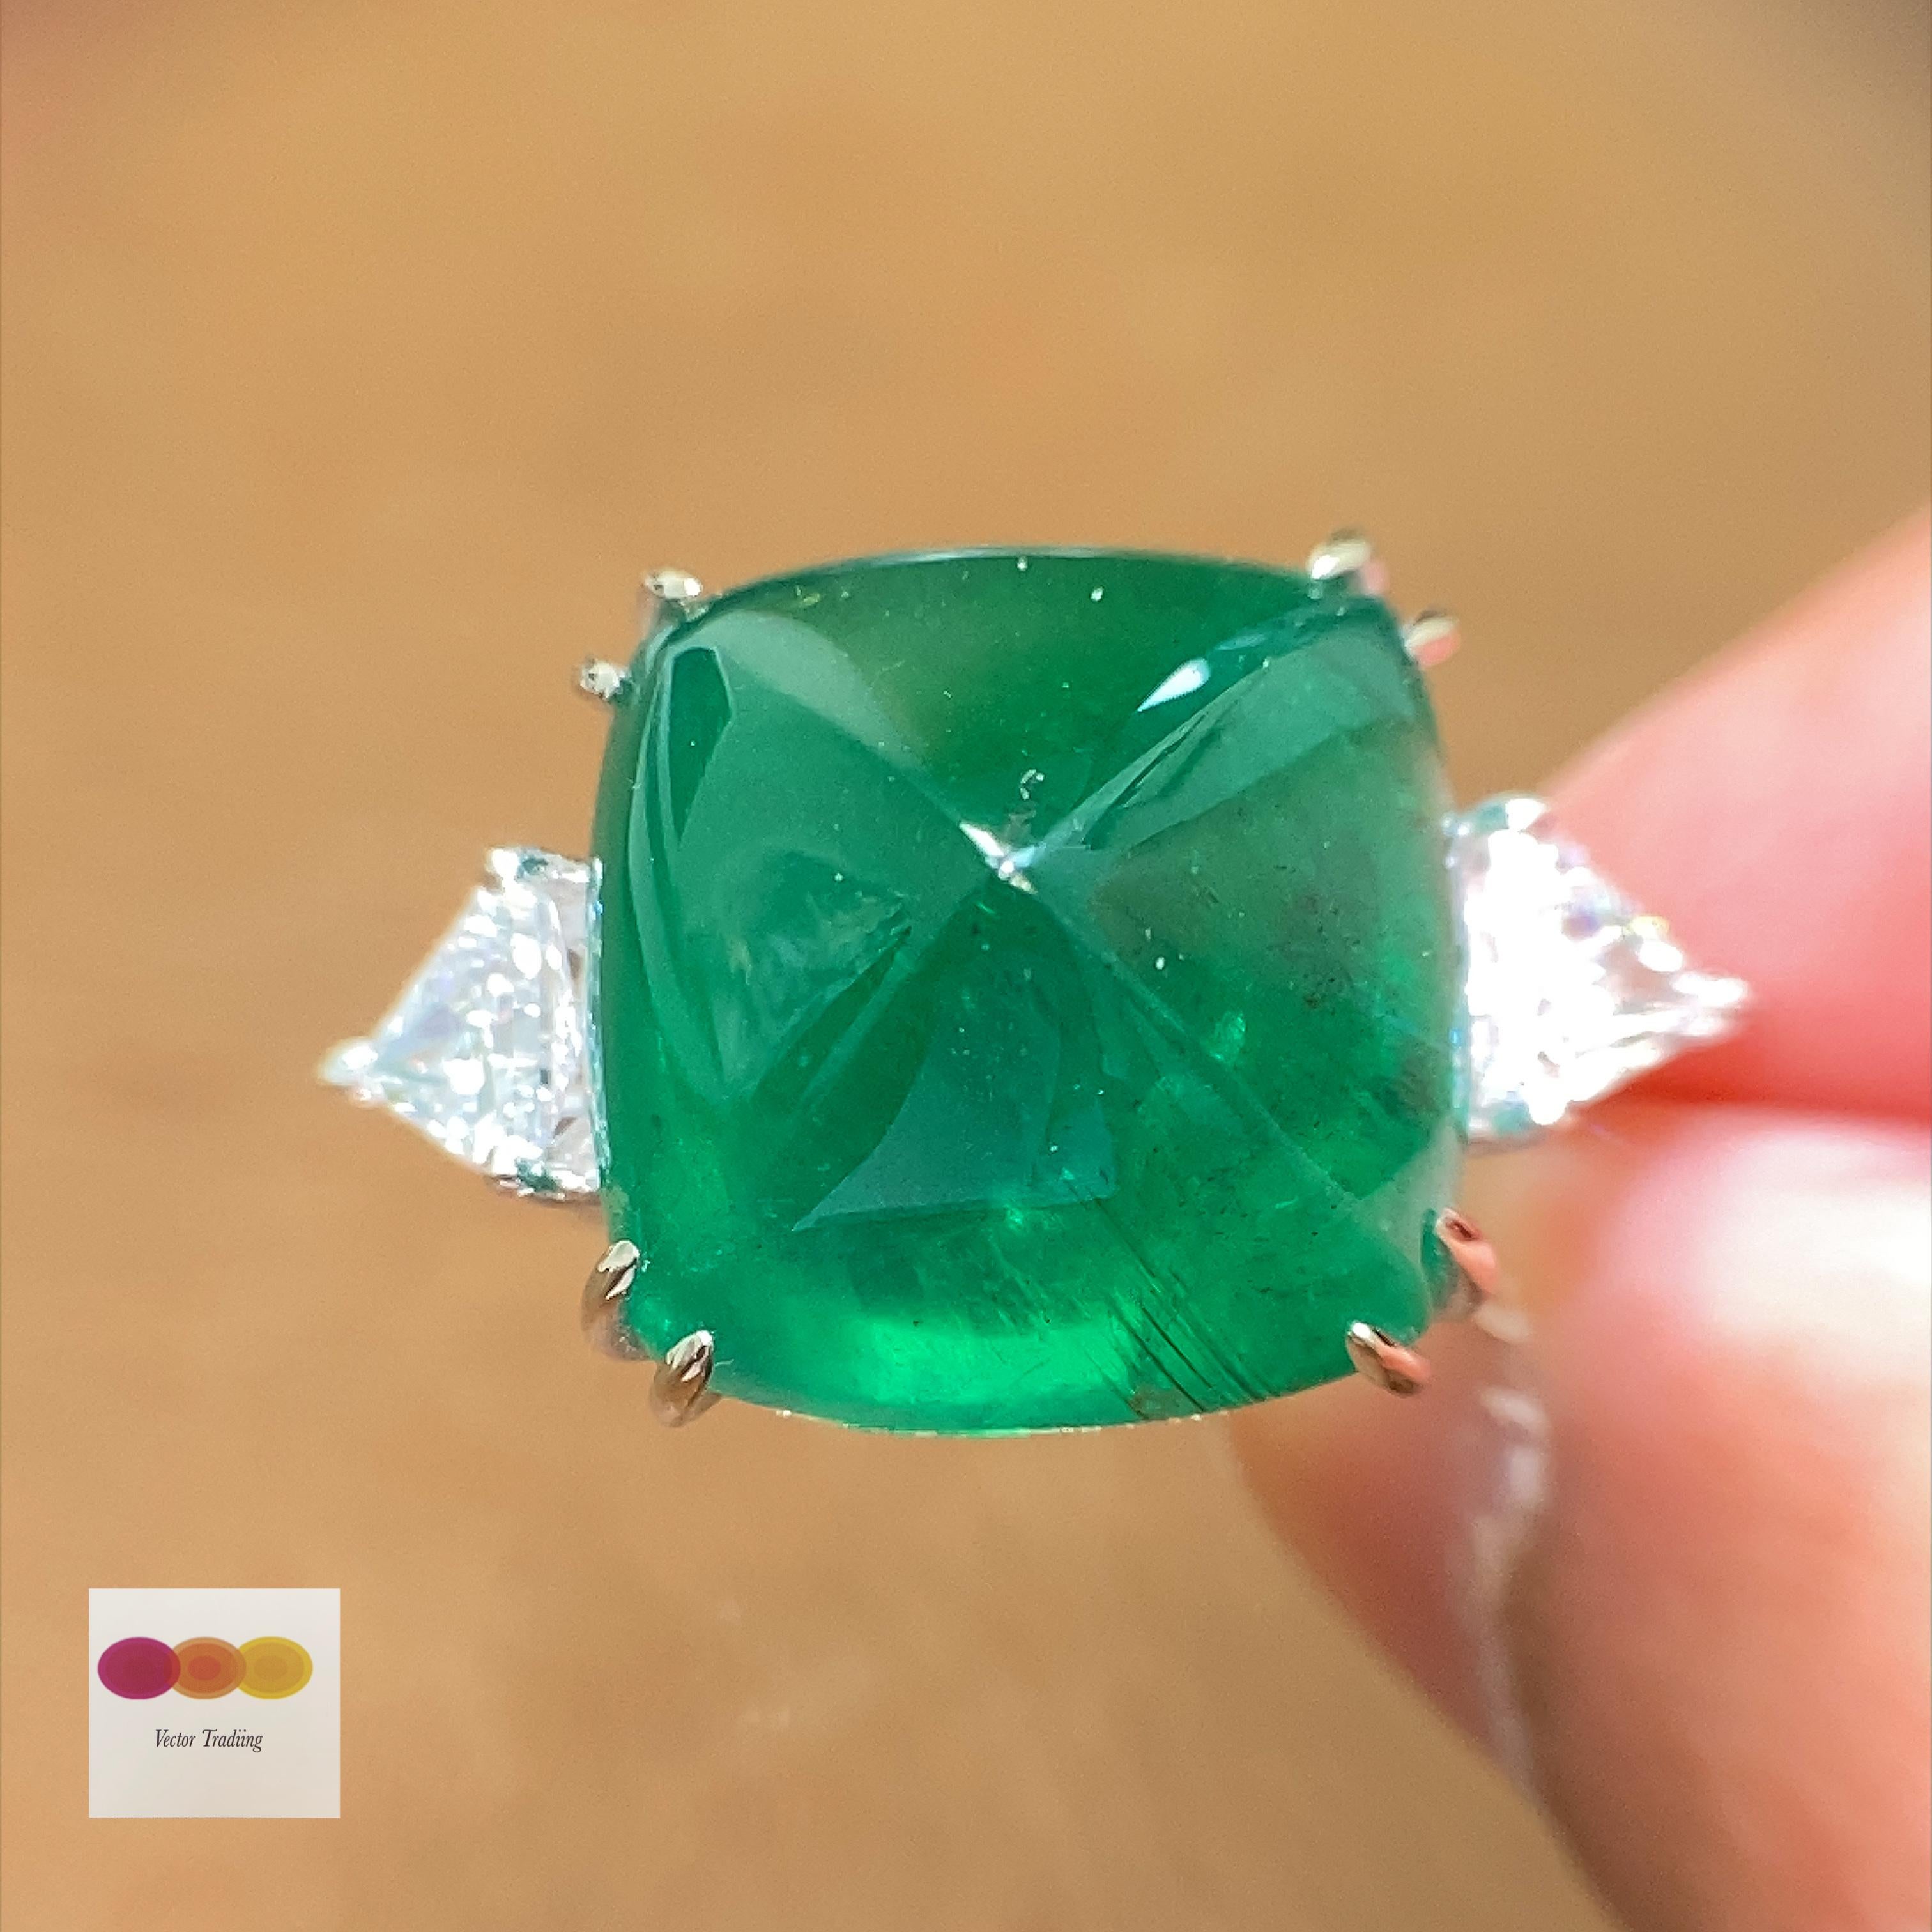 22.61 Carat GRS Certified Emerald Sugarloaf and White Diamond Cocktail Ring:

A gorgeous ring, it features a luscious emerald sugarloaf weighing 22.61 carat flanked by two shield-cut white diamonds weighing 1.02 carat. The emerald sugarloaf,